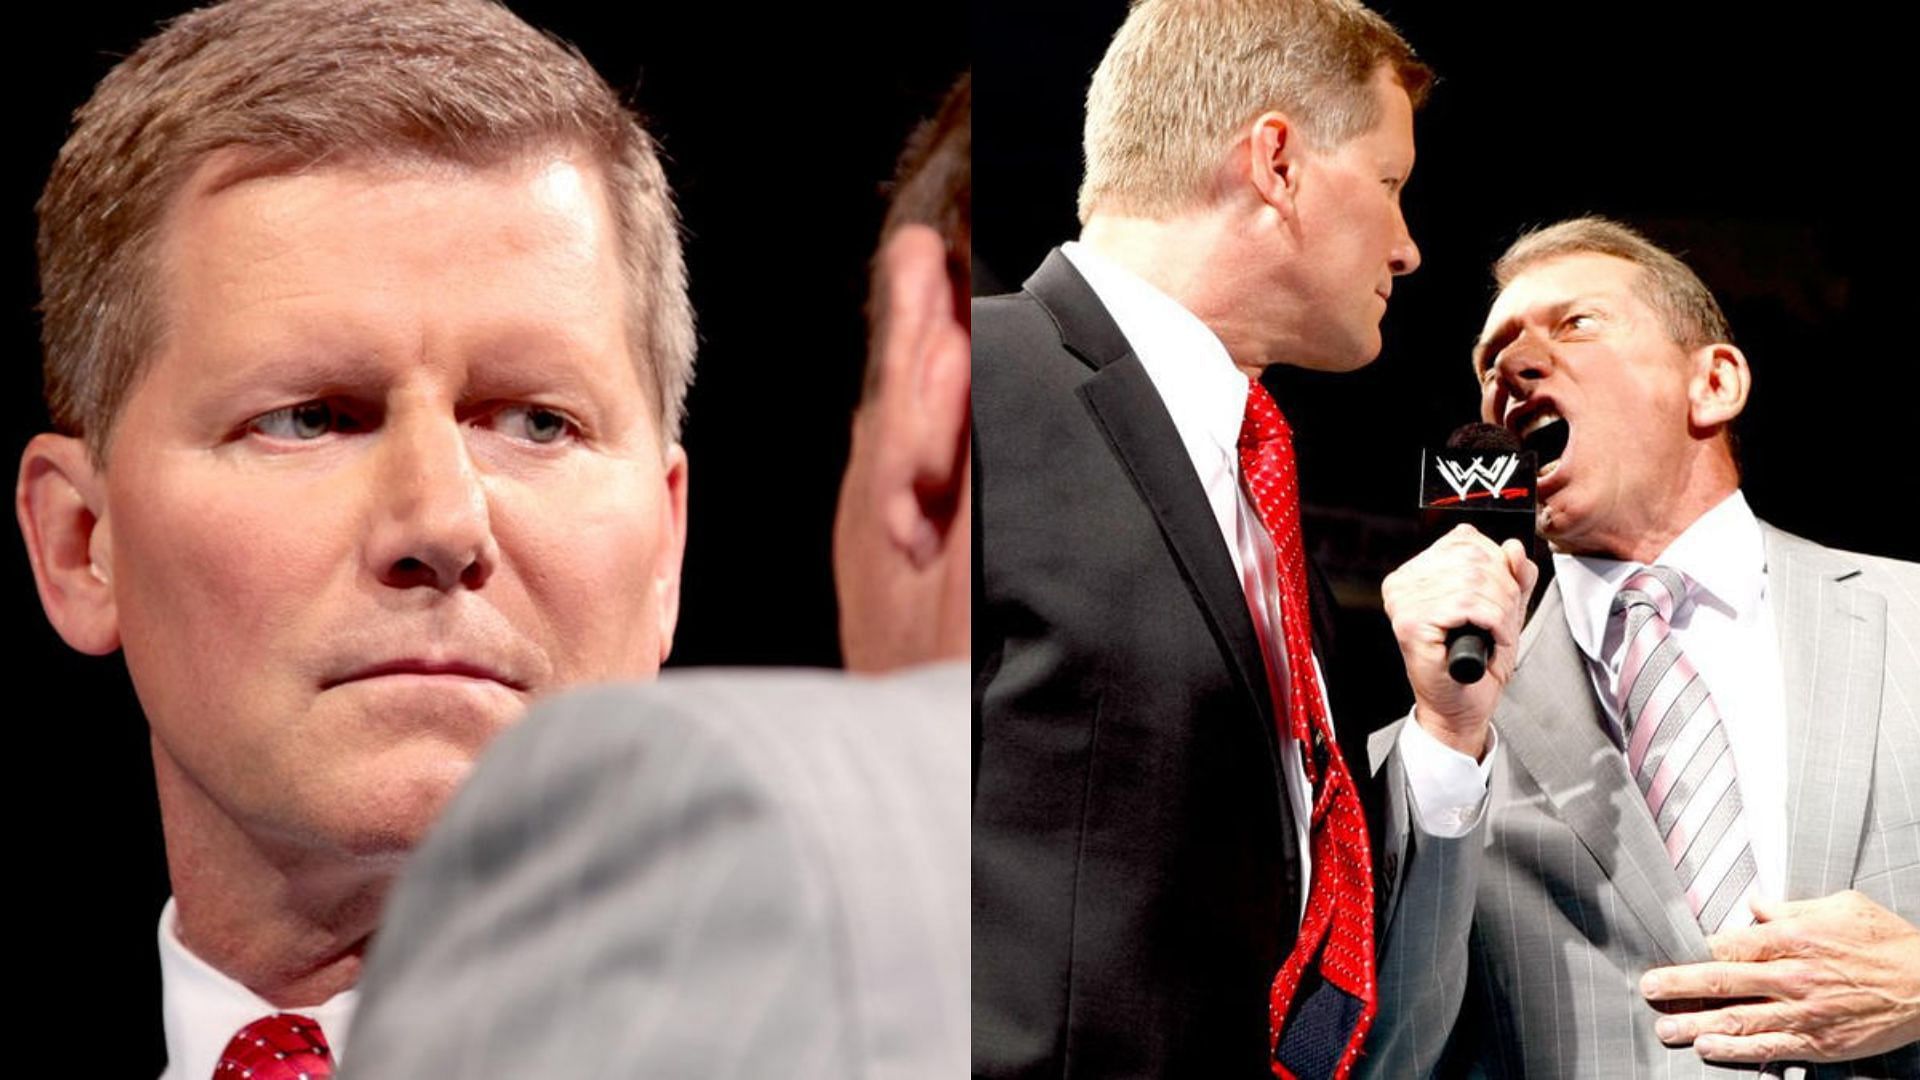 John Laurinaitis has also been involved in the Vince McMahon controversy